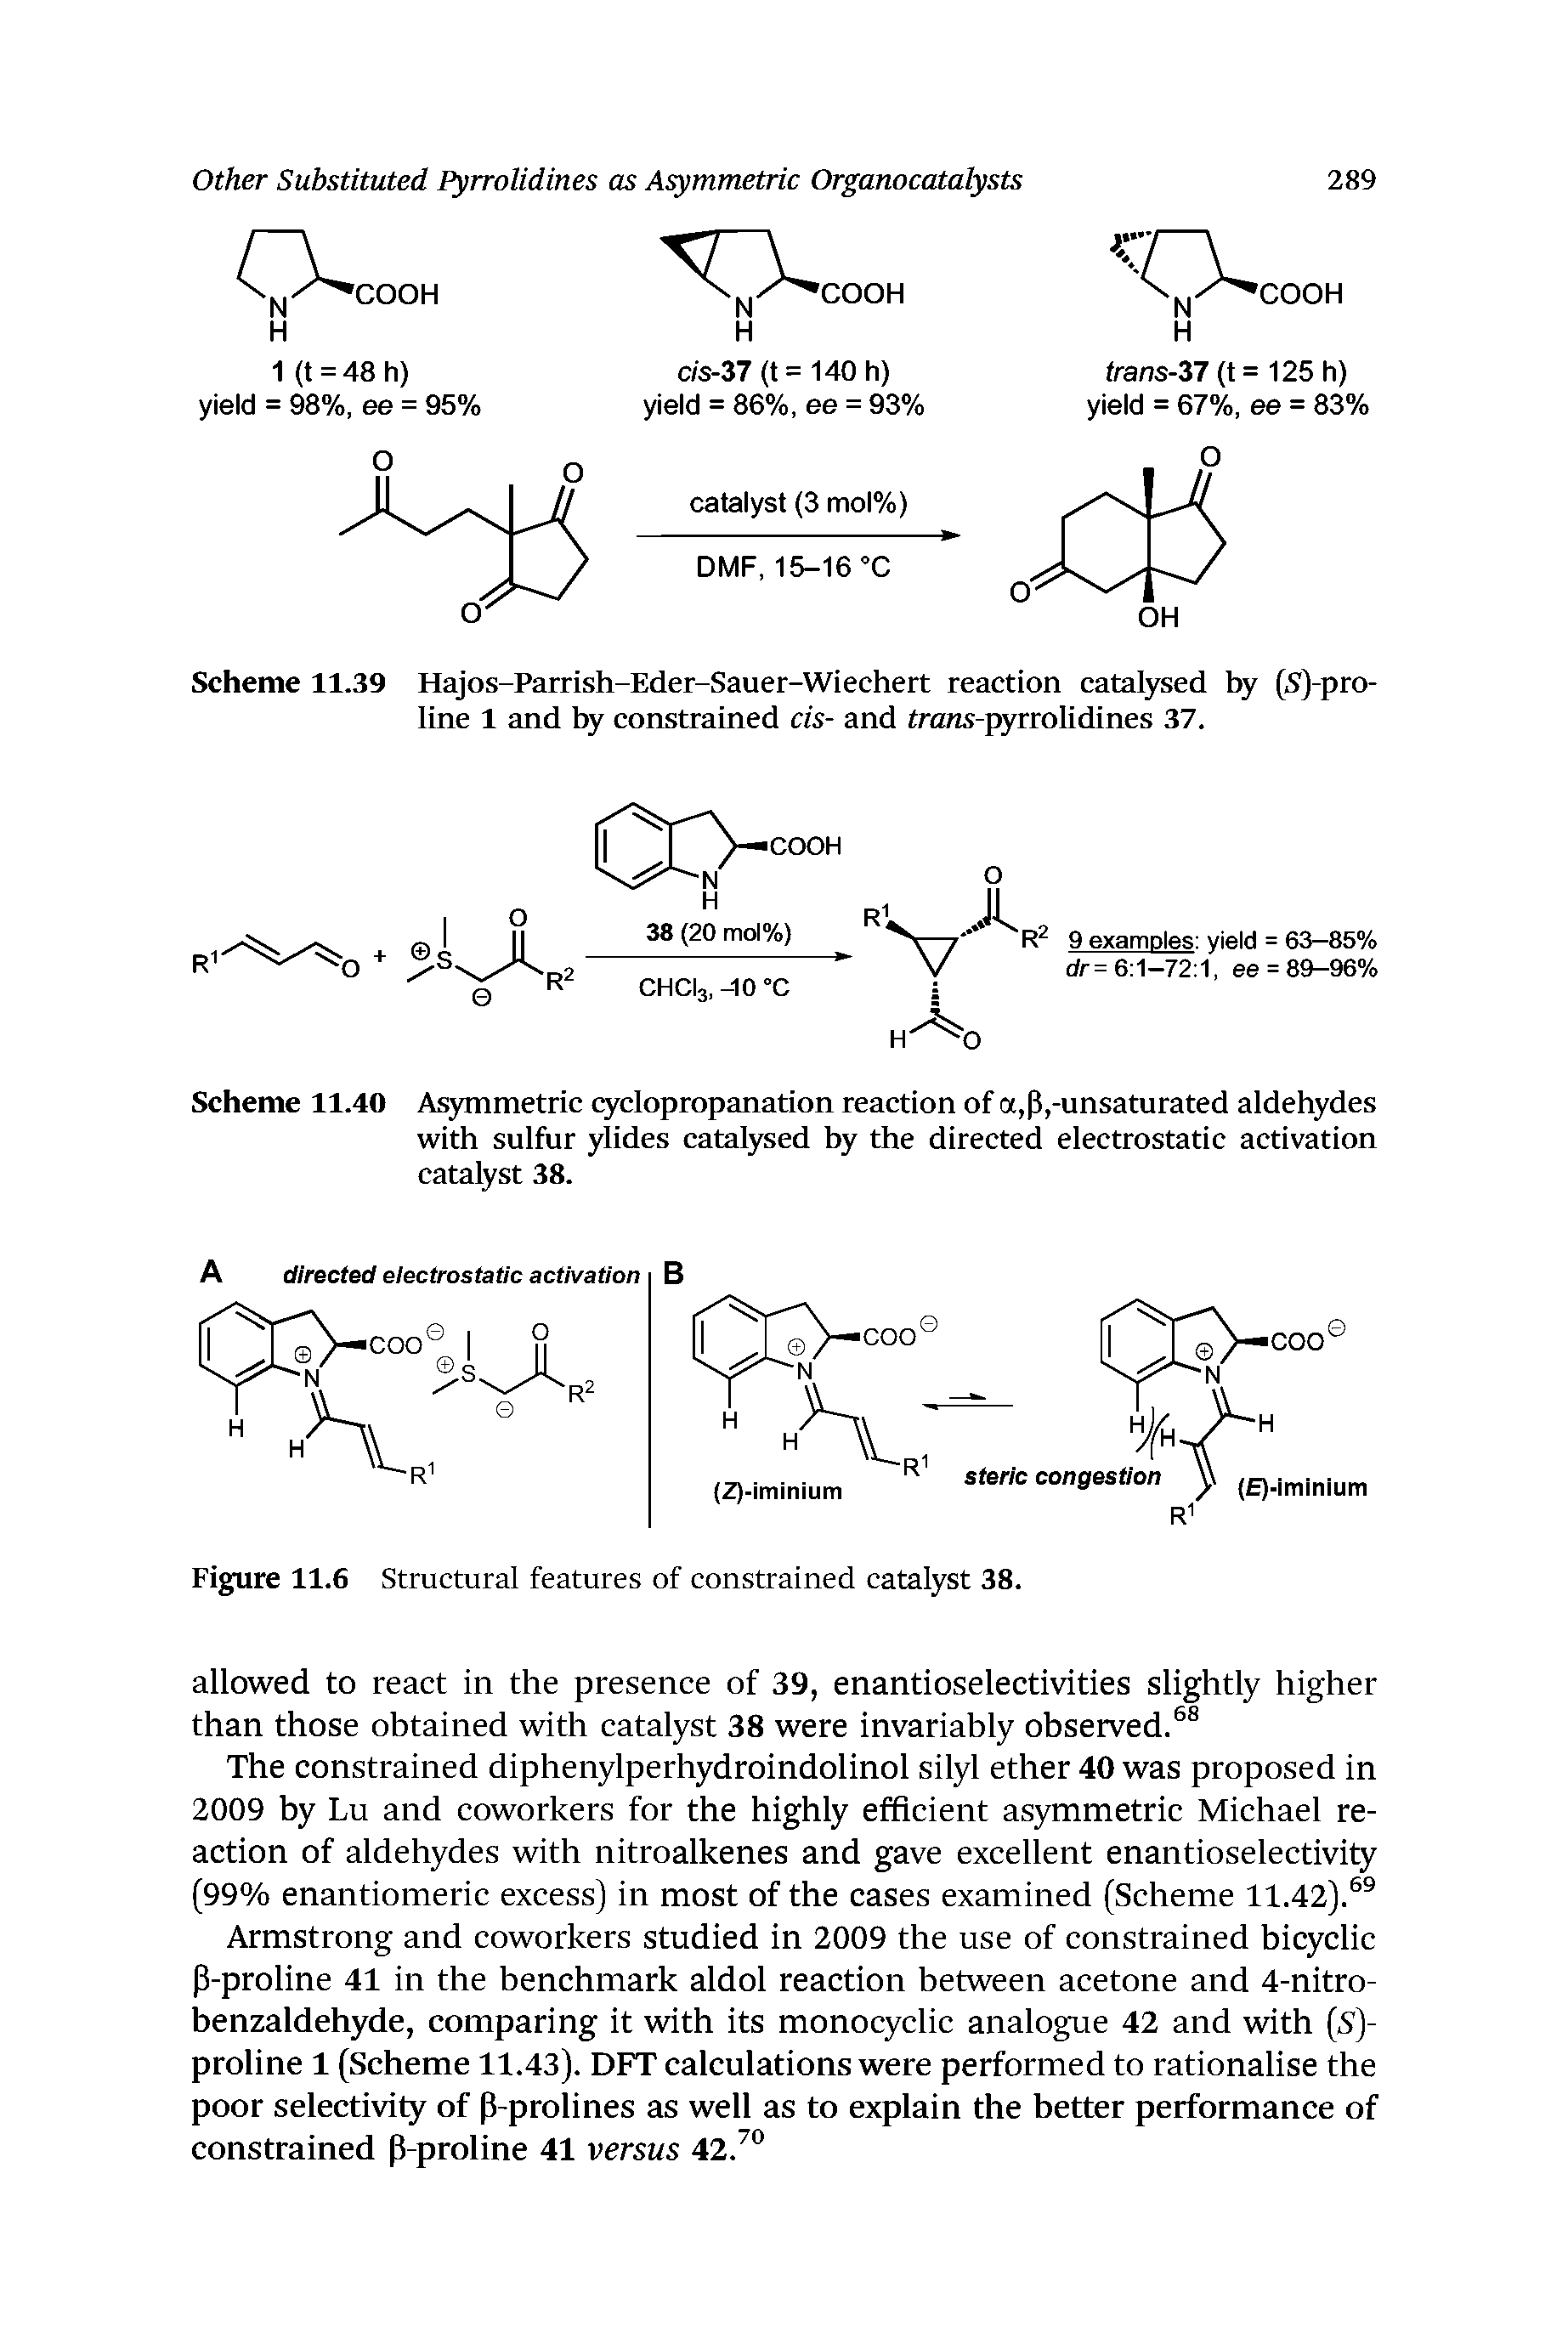 Scheme 11.39 Hajos-Parrish-Eder-Sauer-Wiechert reaction catalysed by (5 )-pro-line 1 and by constrained cis- and trans-pyrrolidines 37.